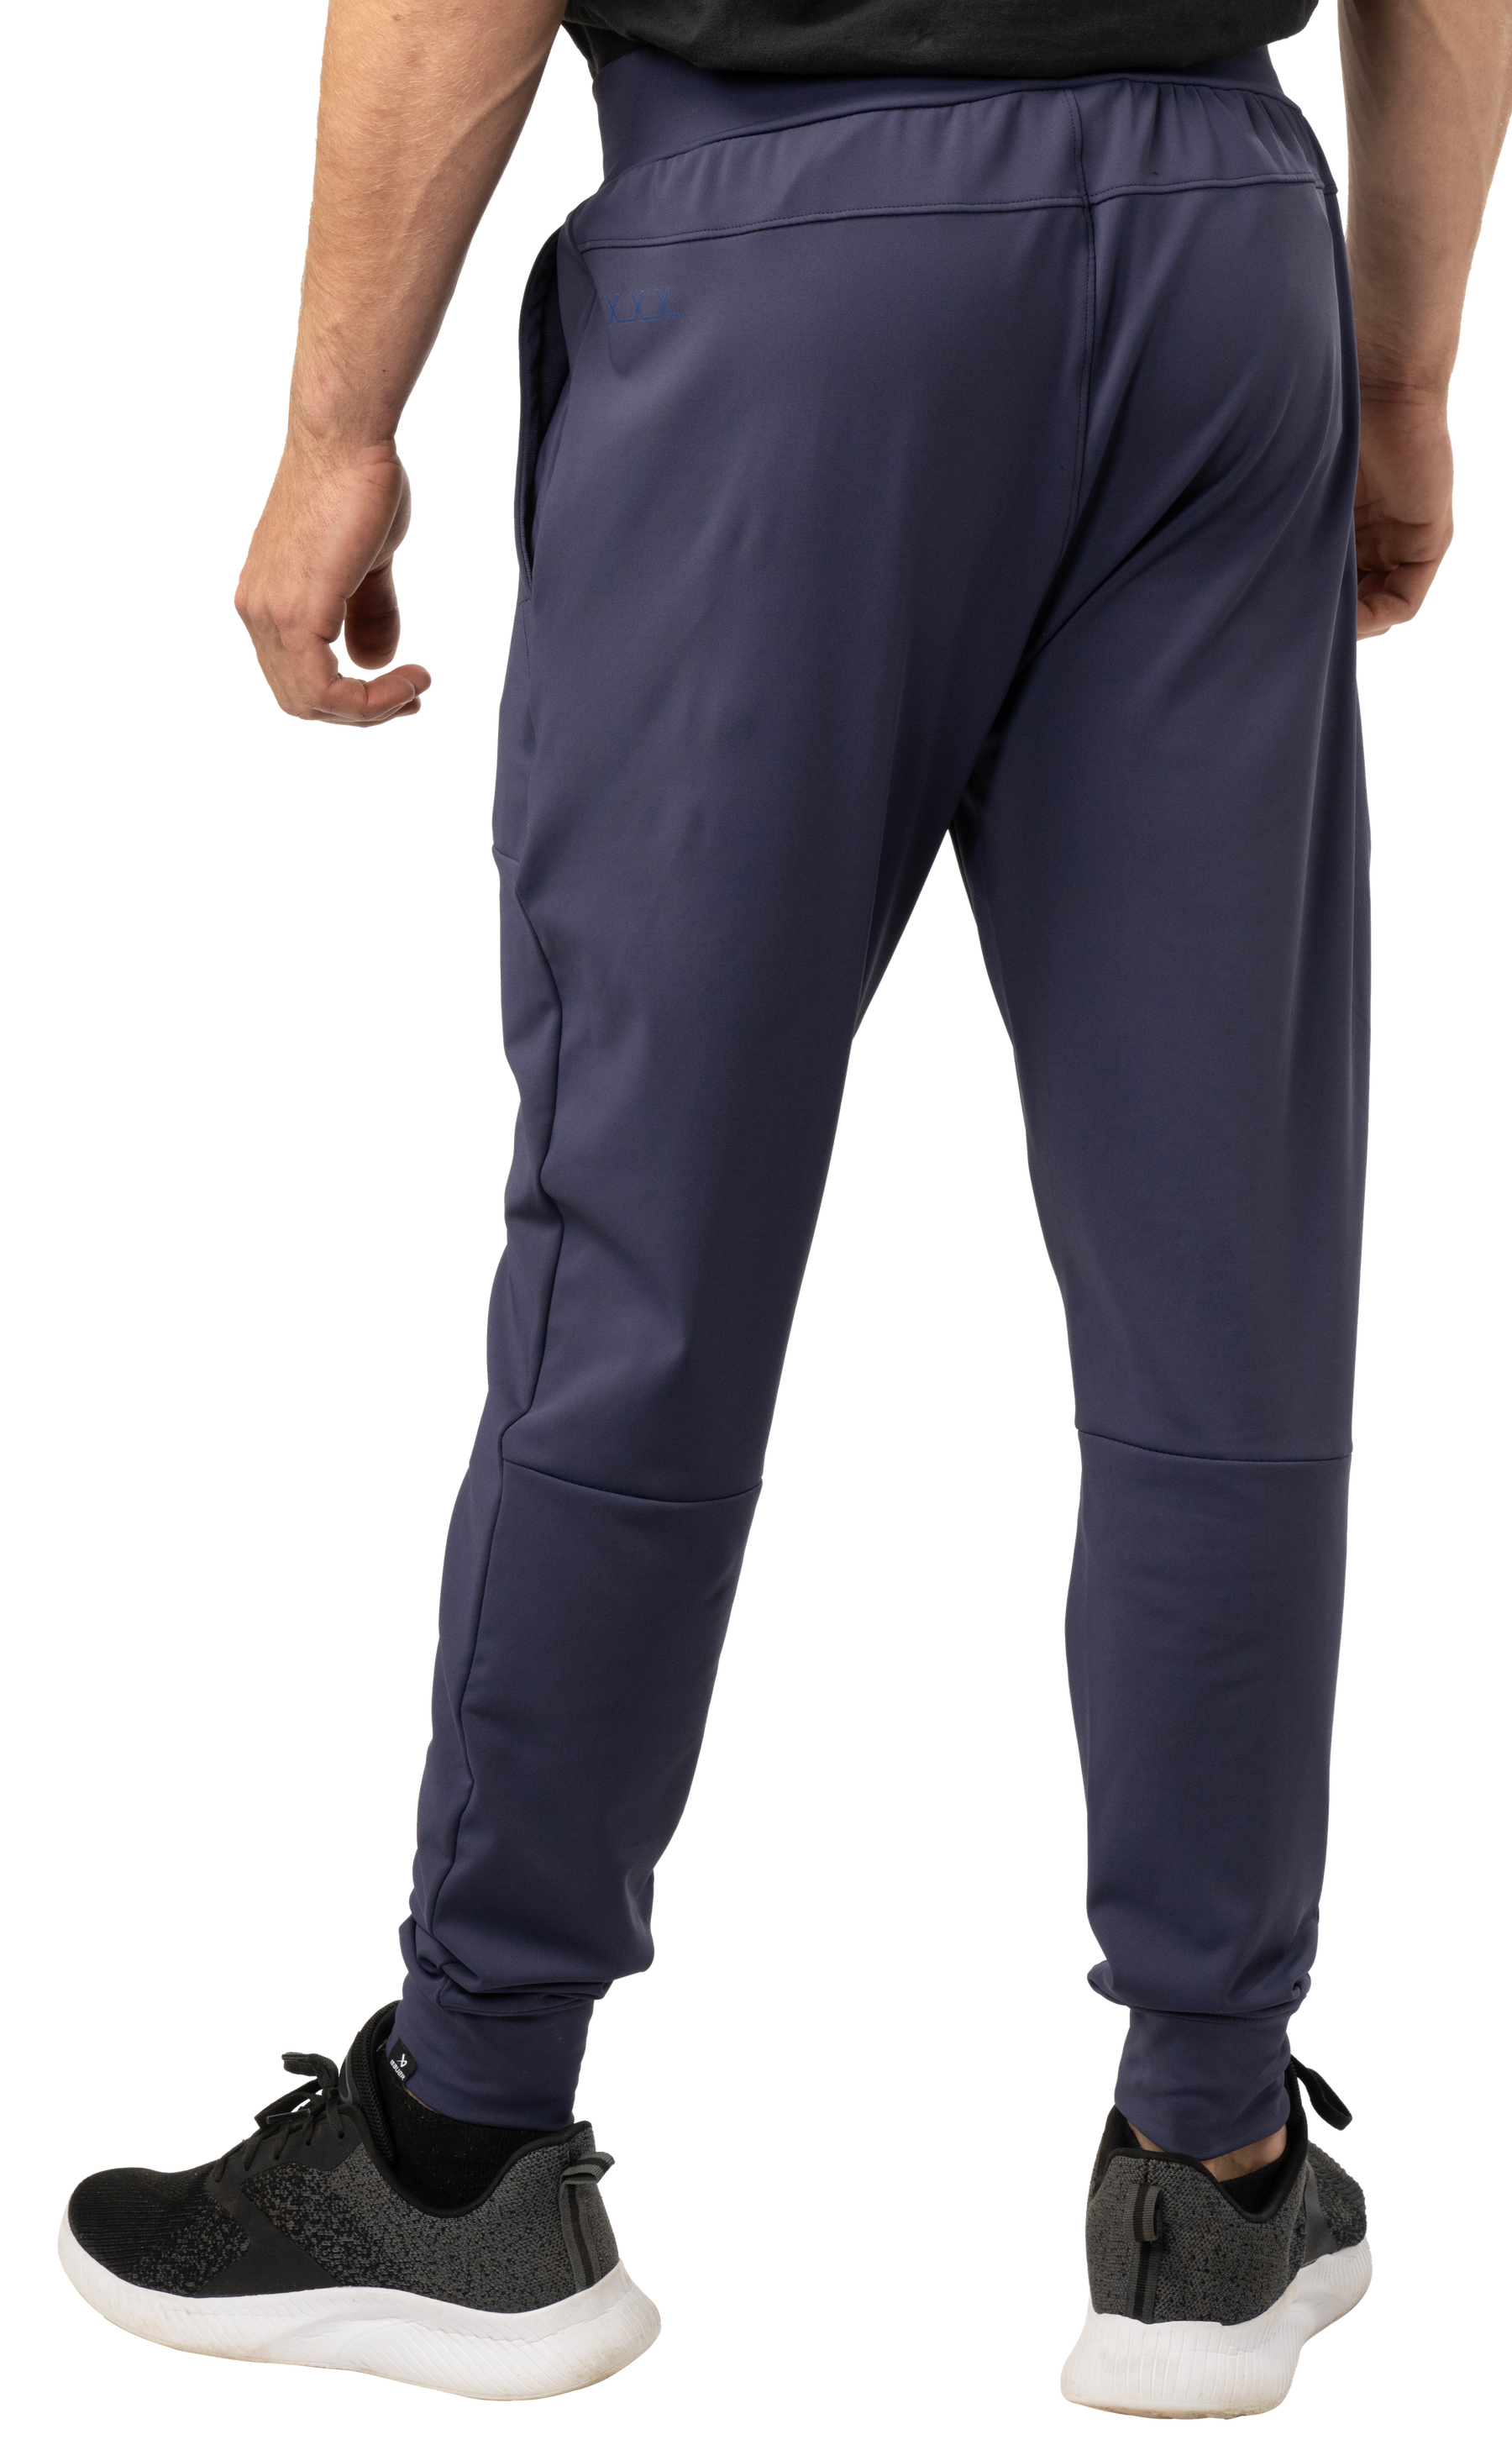 Bauer Fleece Warmth Knit Jogger Adult